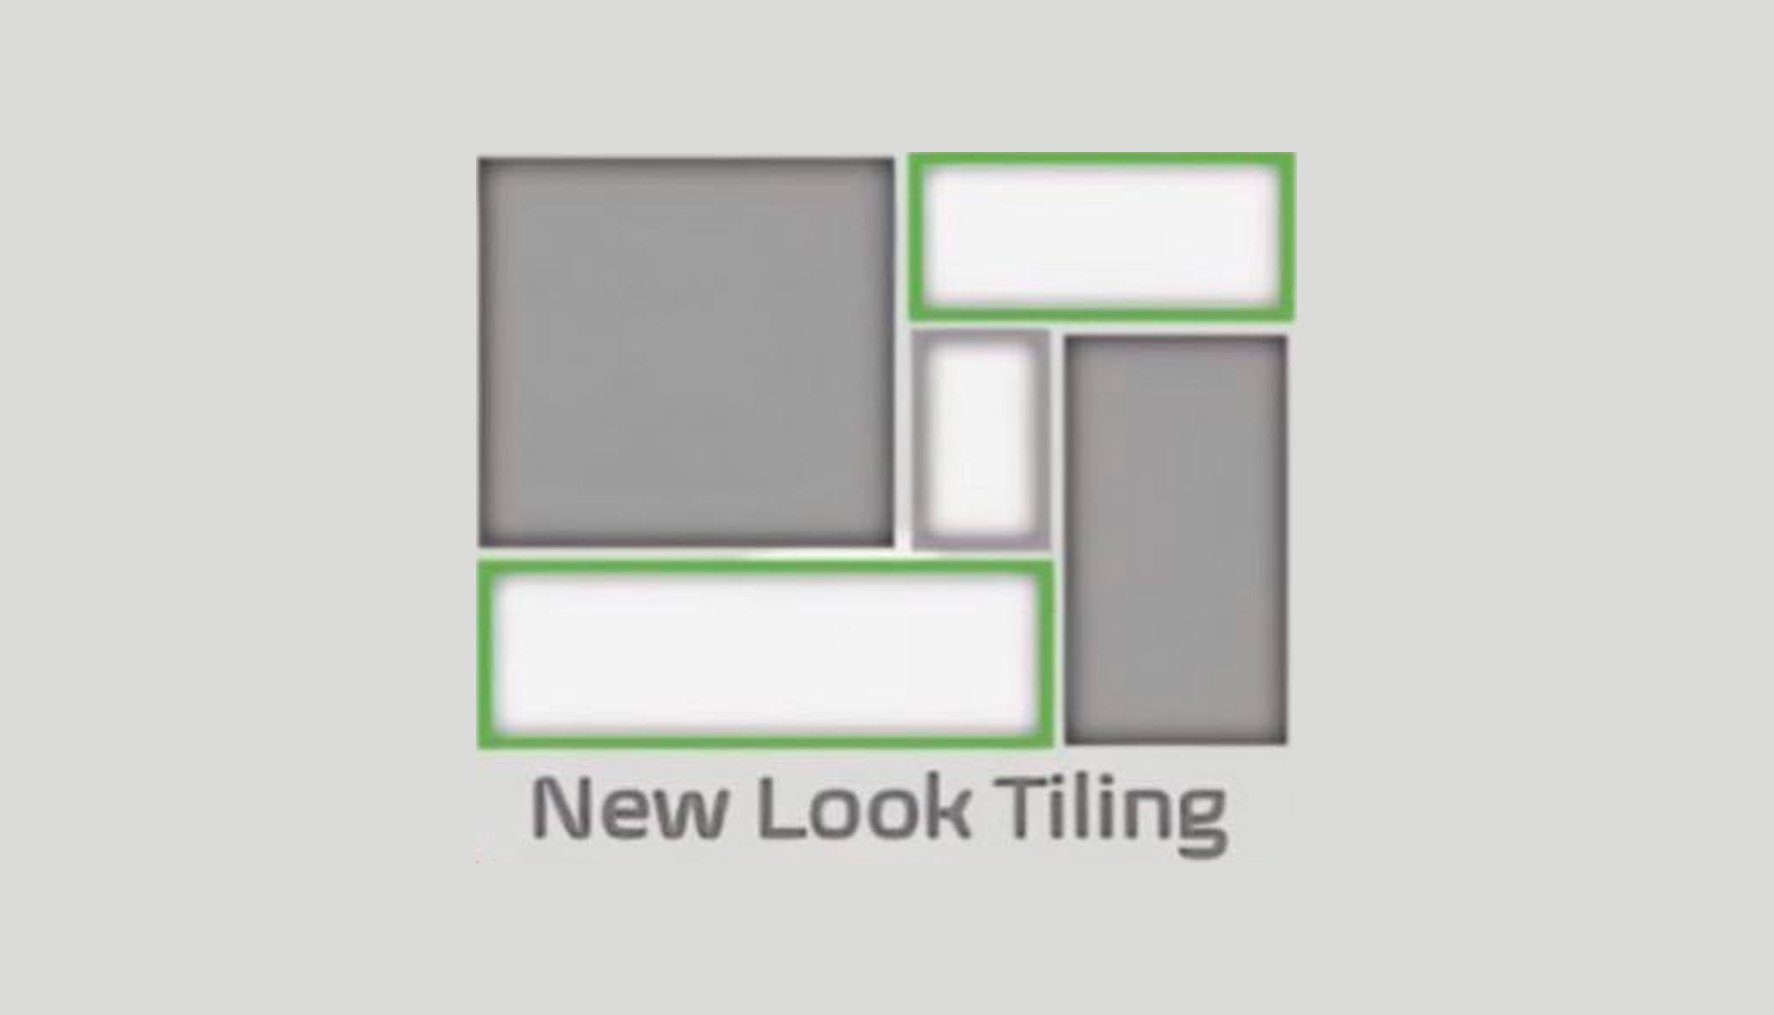 New Look Tiling